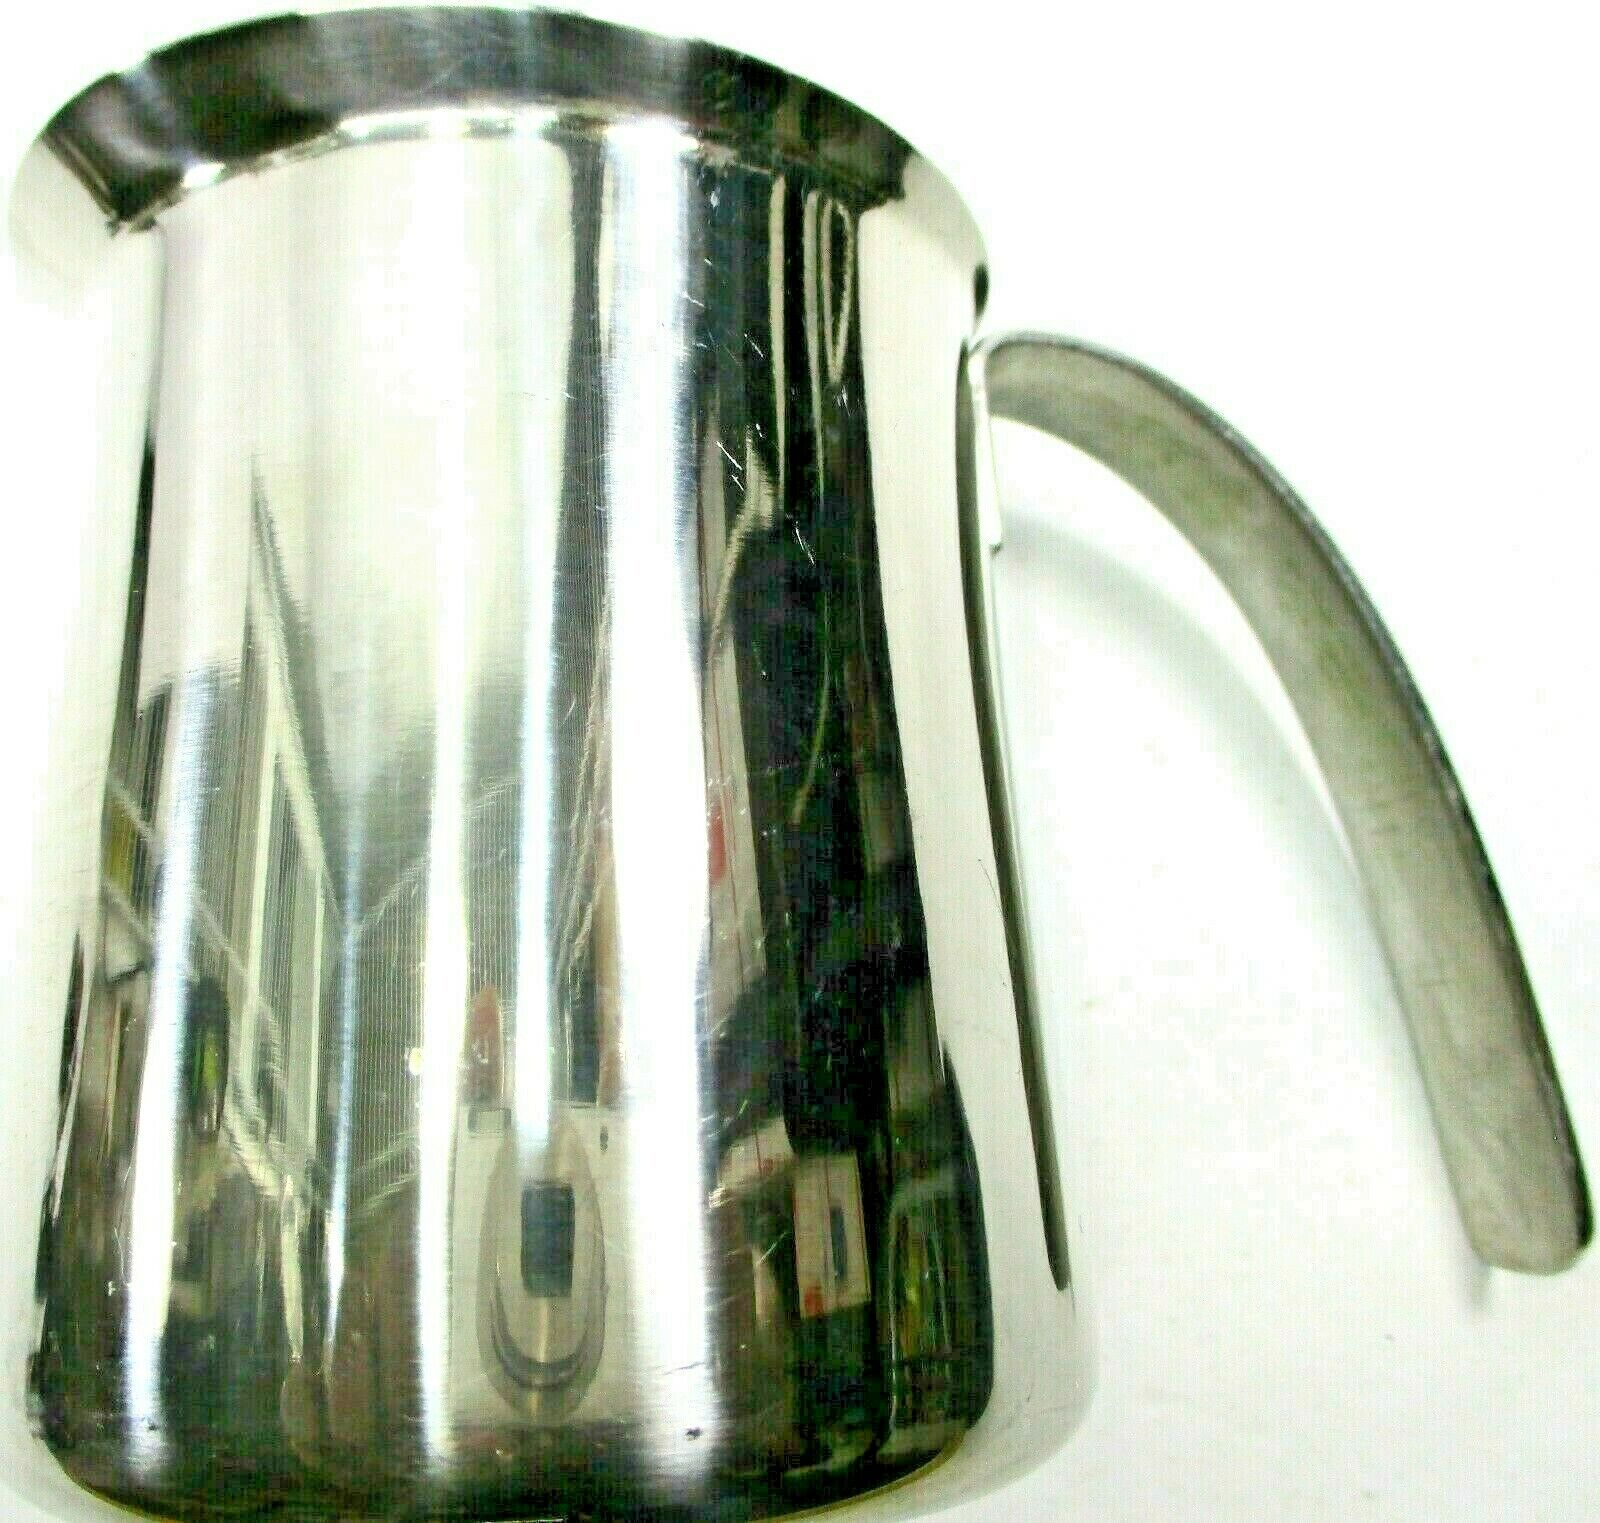 Krups Stainless Steel 18-8 Milk Cup Made in PRC